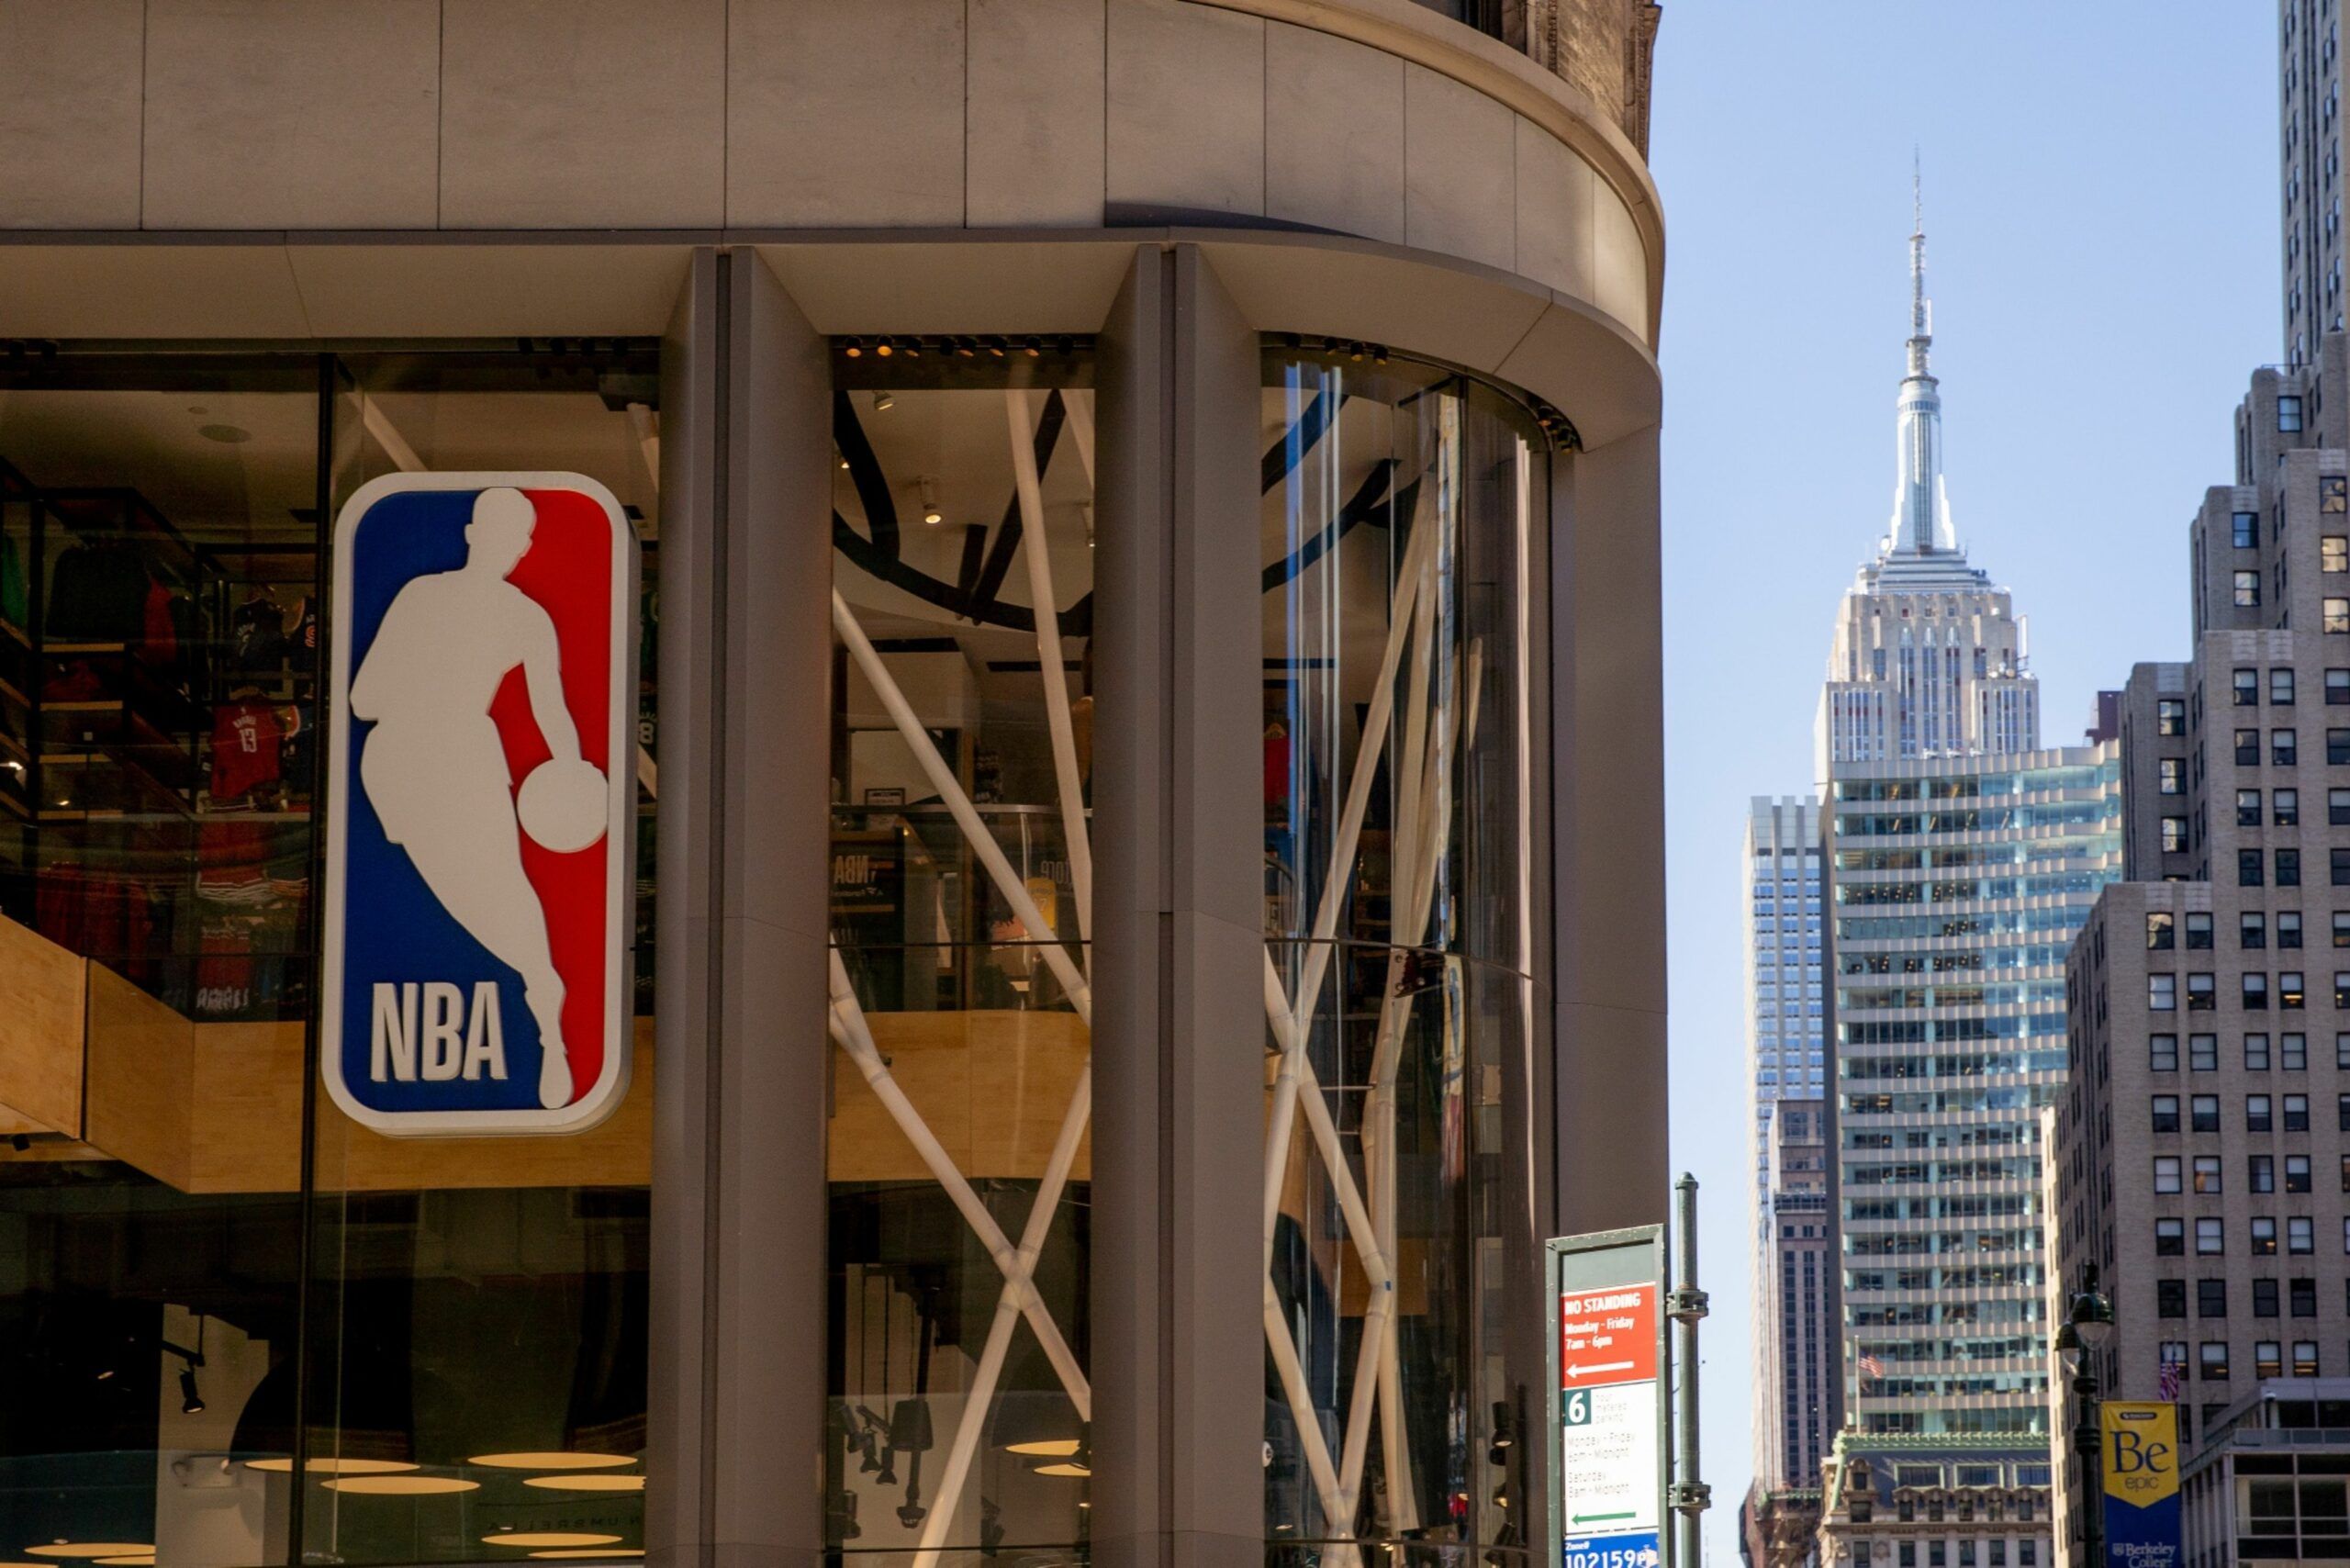 The National Basketball Association Inc. (NBA) store at 545 Fifth Avenue in New York, U.S., on Tuesday, March 30, 2021. Not long ago, major fashion brands were willing to pay ballooning rents just to have a store on Manhattan's Fifth Avenue but now the world-famous shopping strip has transformed into a battleground between landlords and tenants seeking a way out of pricey leases. Photographer: Amir Hamja/Bloomberg